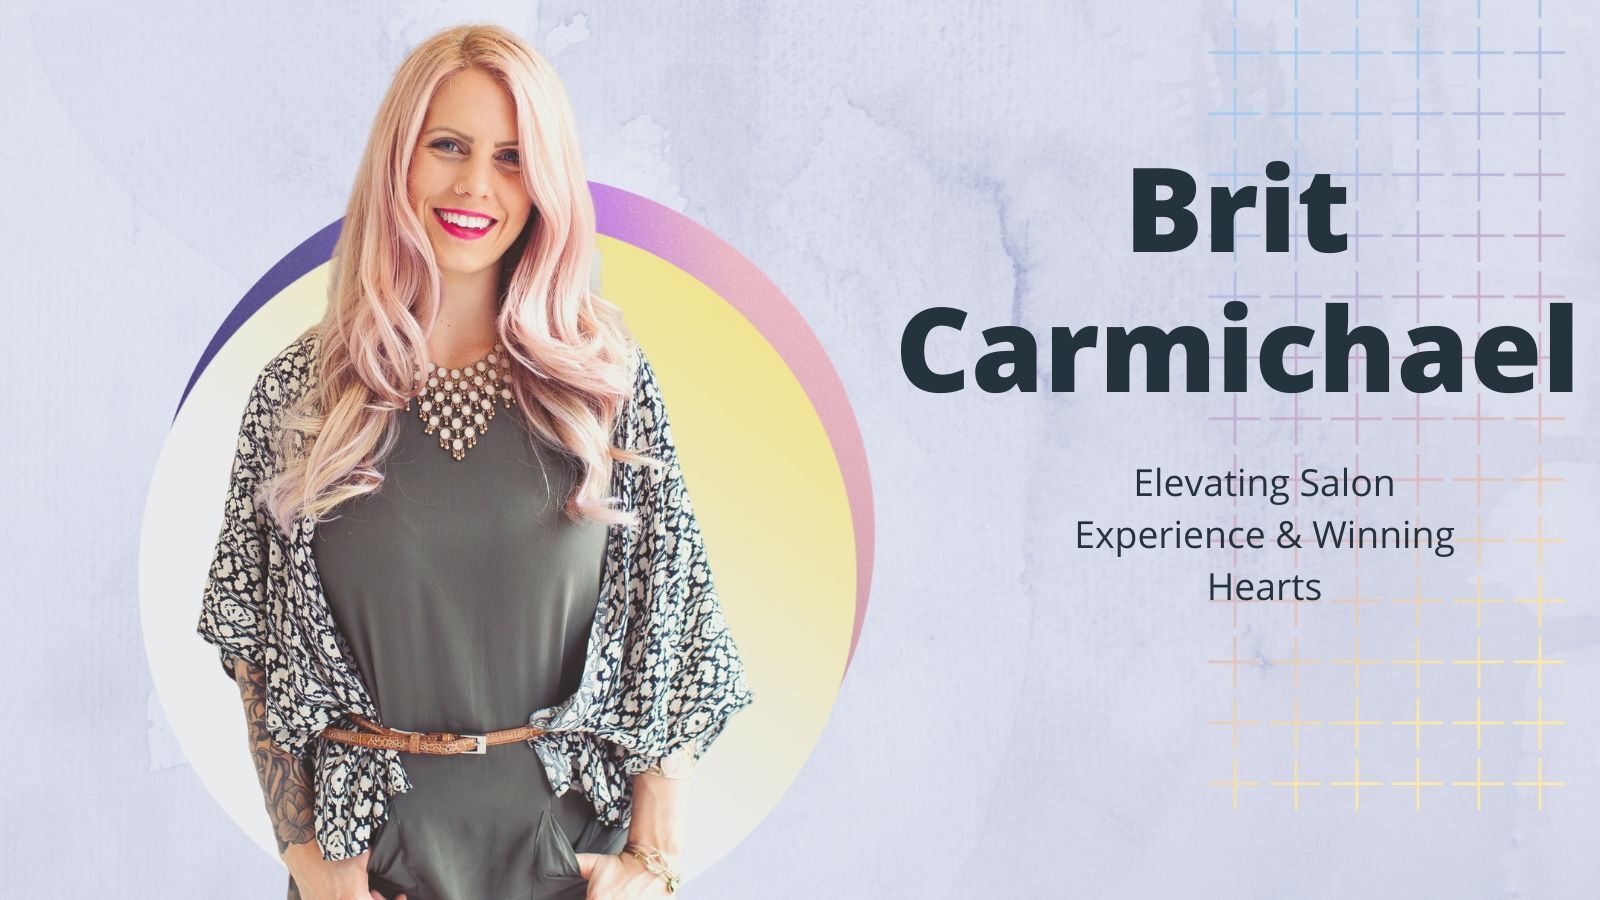 Elevating Salon Experience & Winning Hearts: The Success Story Of Brit Carmichael